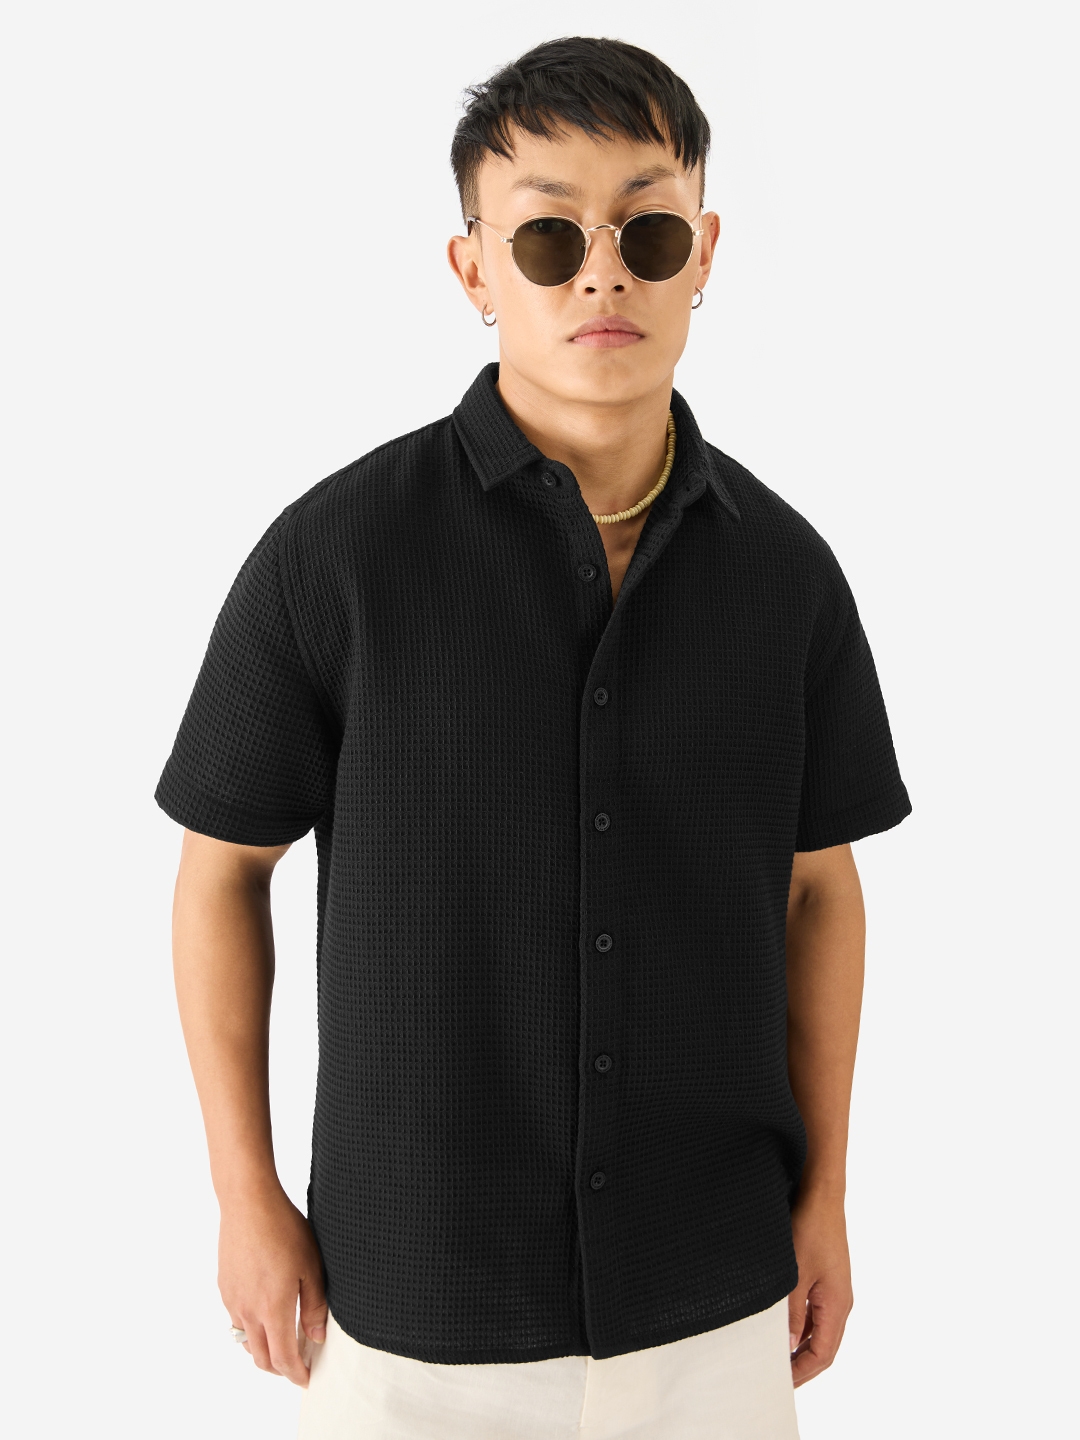 The Souled Store | Men's Solids Midnight Black Holiday Casual Shirt